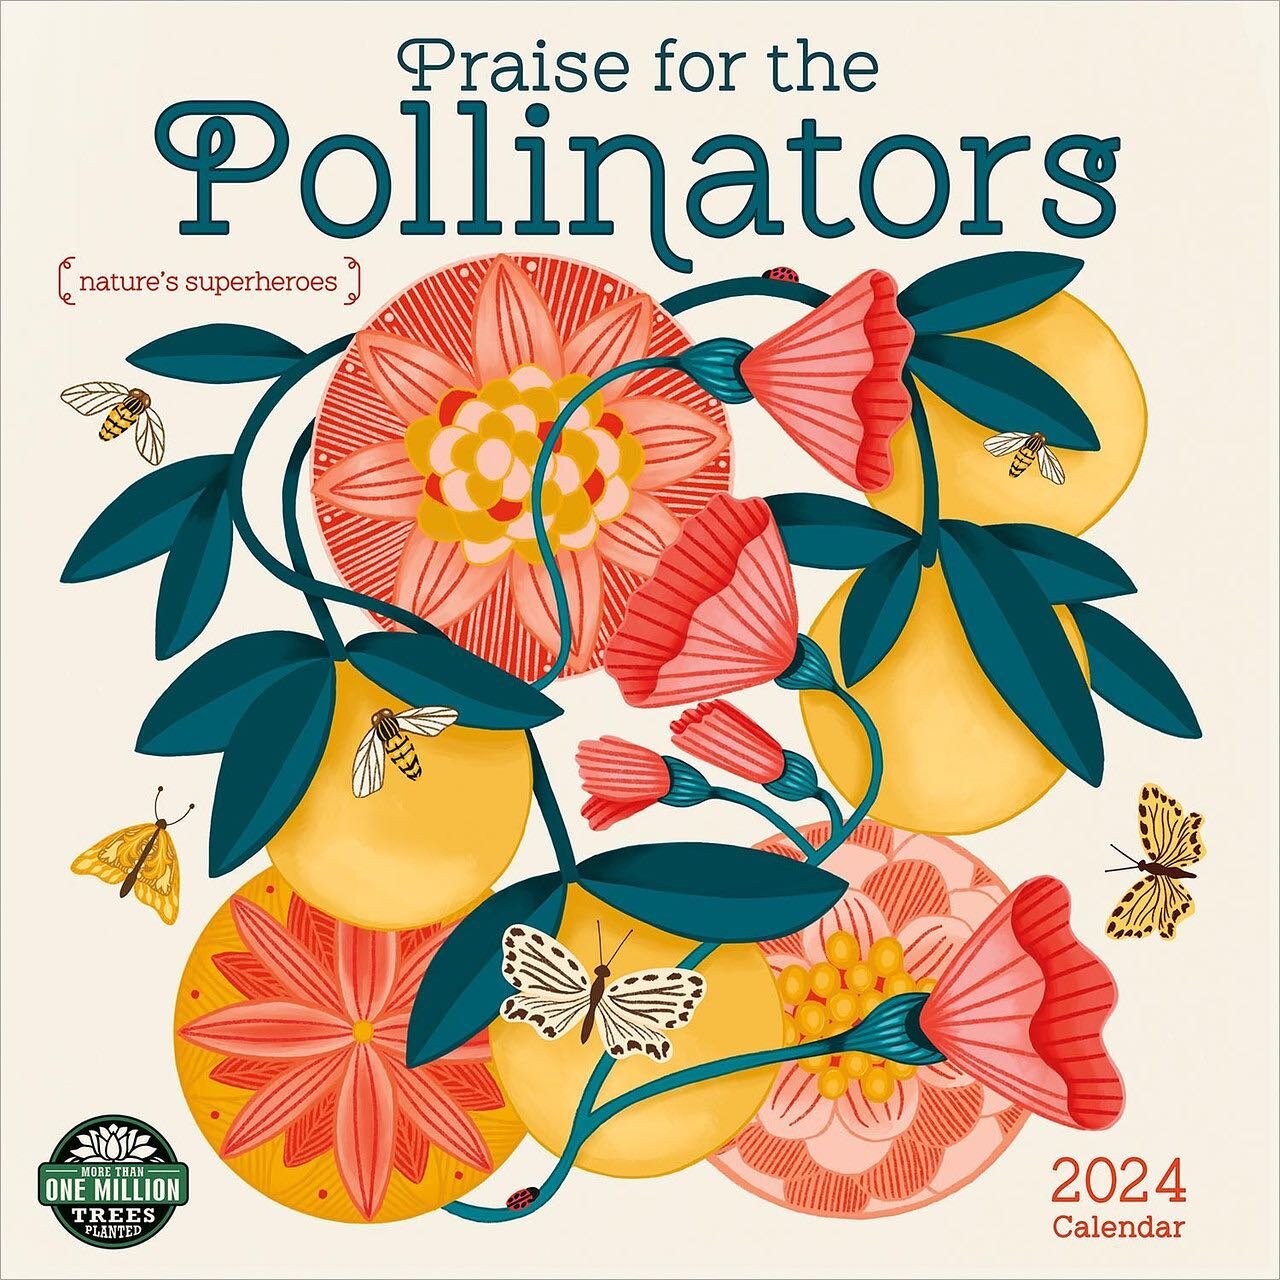 Such a wonderful cover for our Pollinators calendar. Thankyou to @ninapacestudio for the pollinator adjustments . Stunning design to this piece. @amberlotuspublishing #wallcalendar @jehane_ltd #nature_perfection #pollination #bees